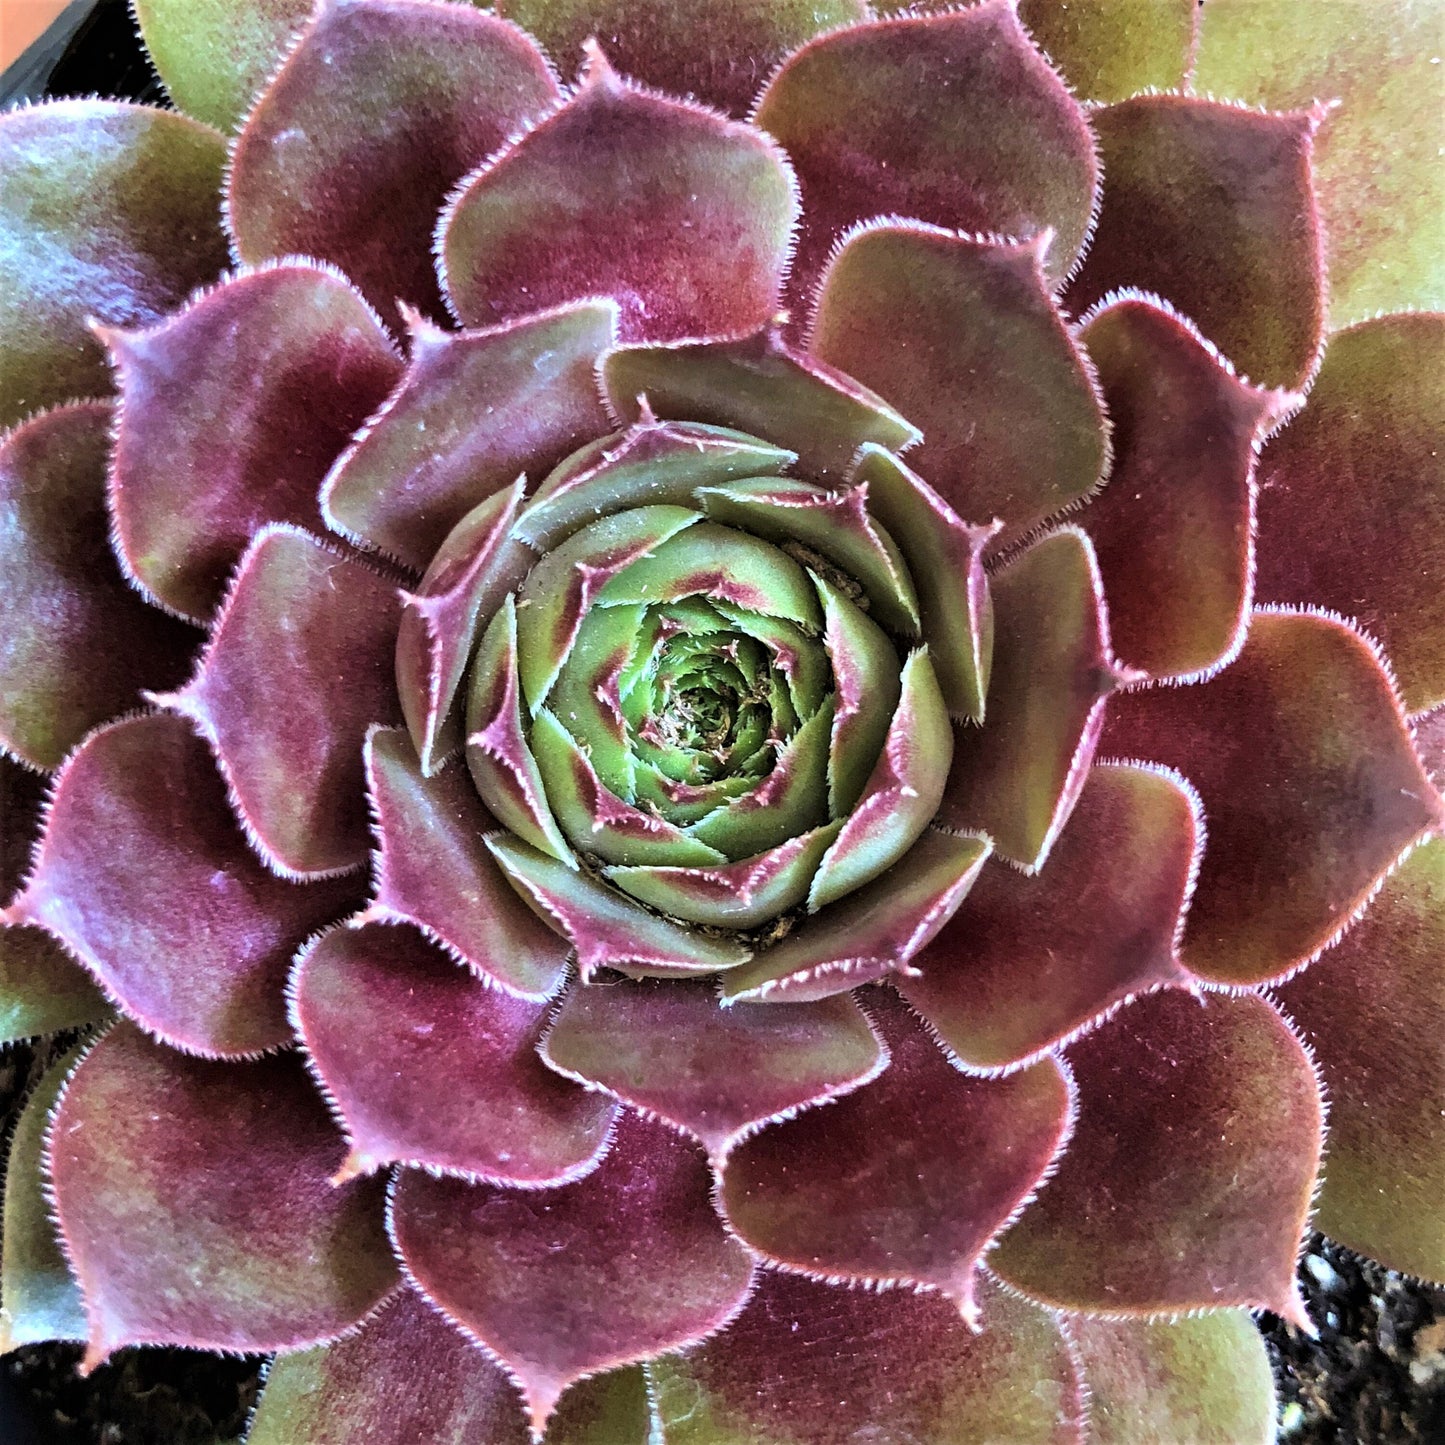 Live Succulents 3-Pack Assorted Live Sempervivum Plants Hens and Chicks Chick Charms Live Plants Grown in 3.5" pot